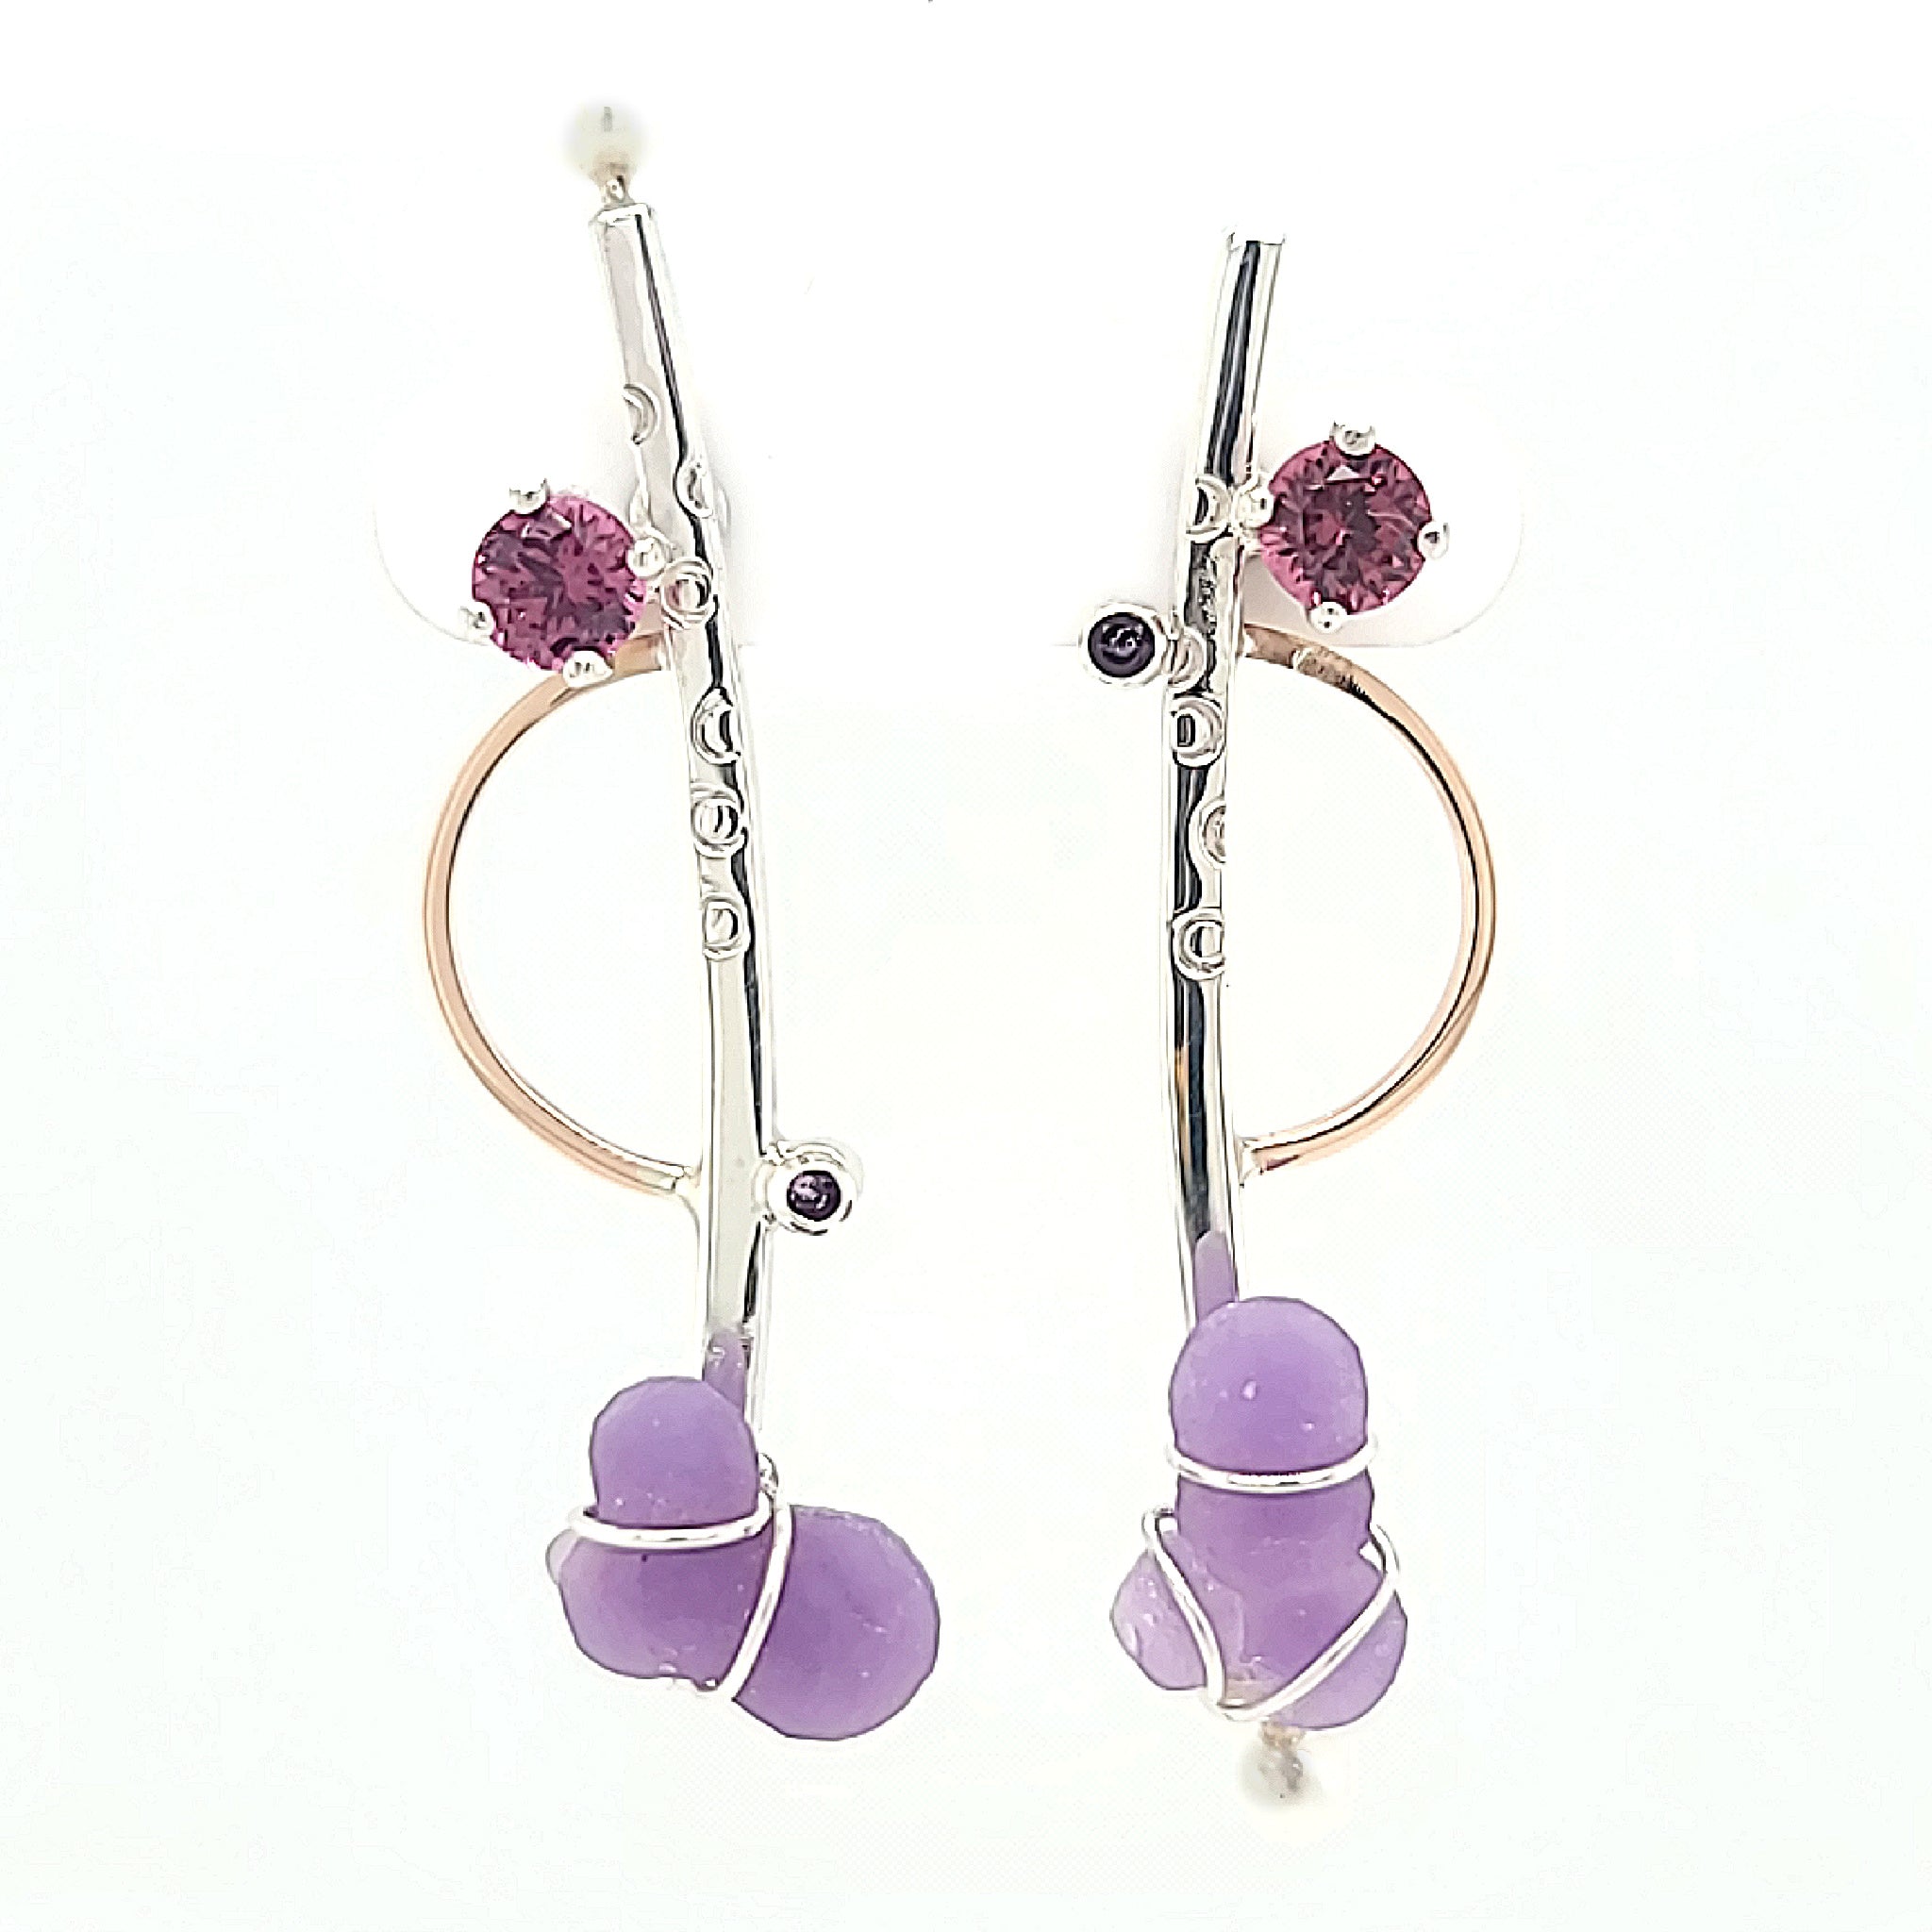 Grape Agate Earrings Set in Sterling Silver with Amethyst, Rhodolite Garnet and Freshwater Pearls with 14k Rose Gold accents.